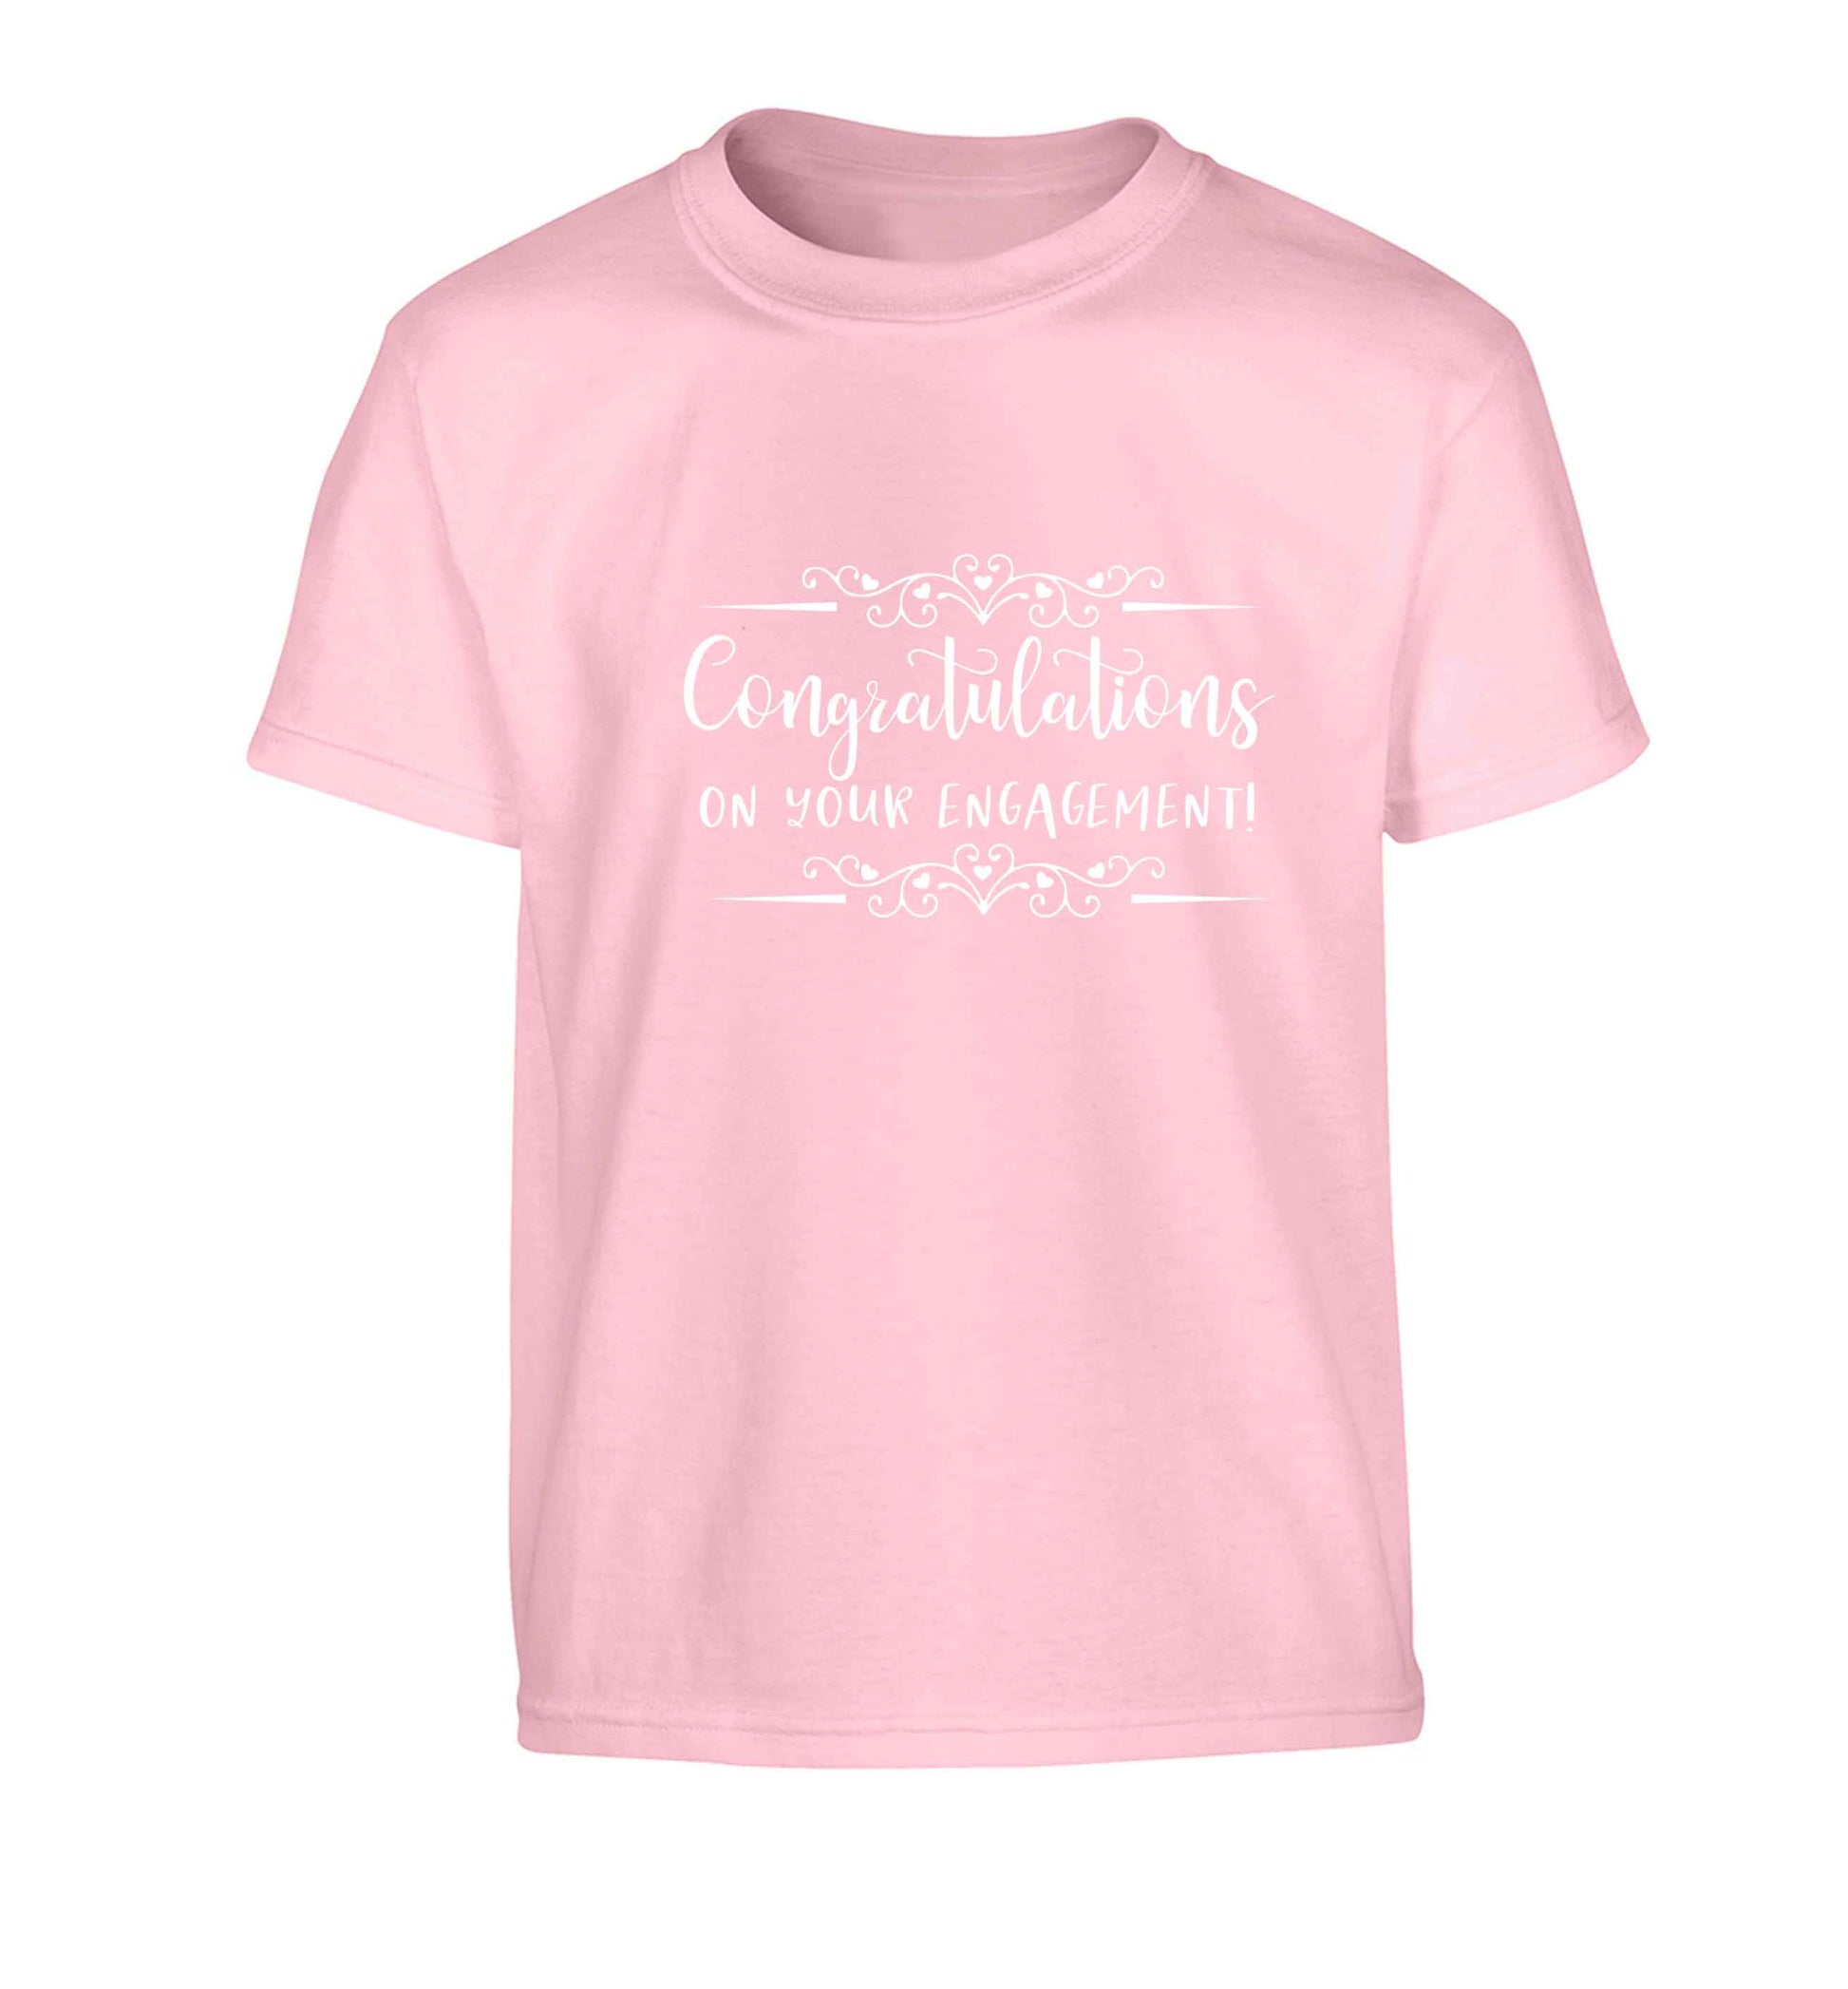 Congratulations on your engagement Children's light pink Tshirt 12-13 Years